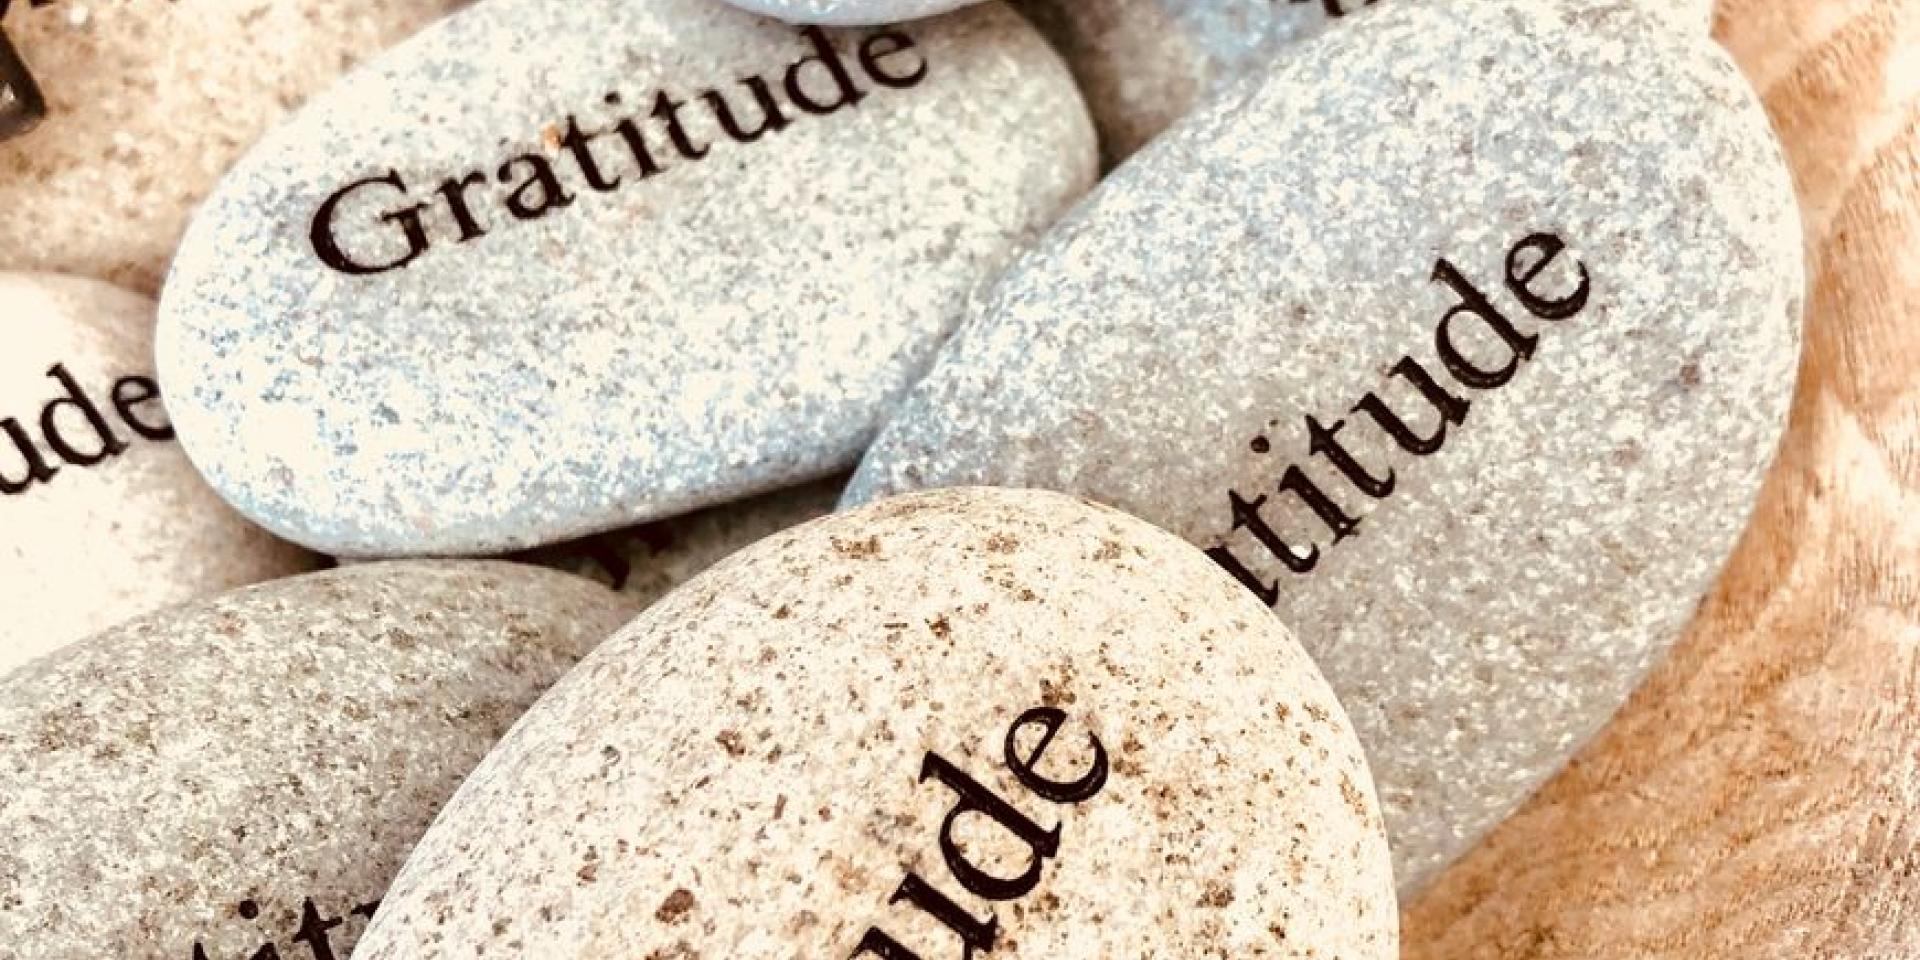 pebbles with word gratitude on them